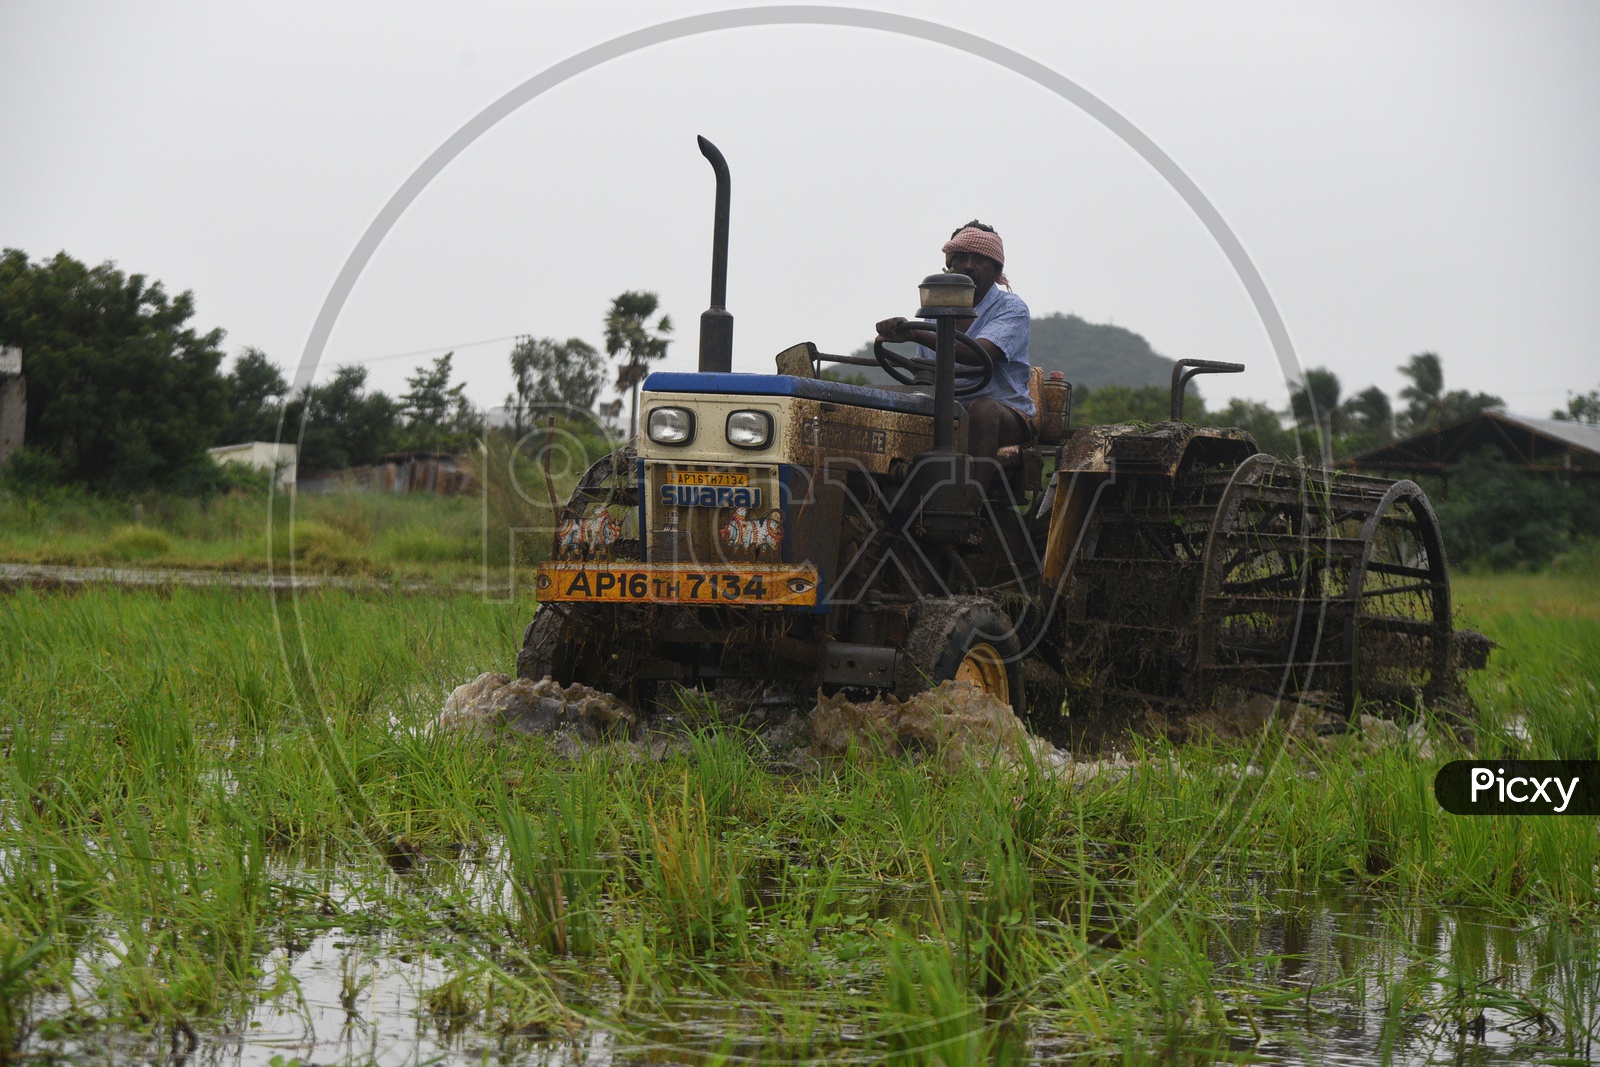 Indian Farmer working in the Agriculture field on a tractor